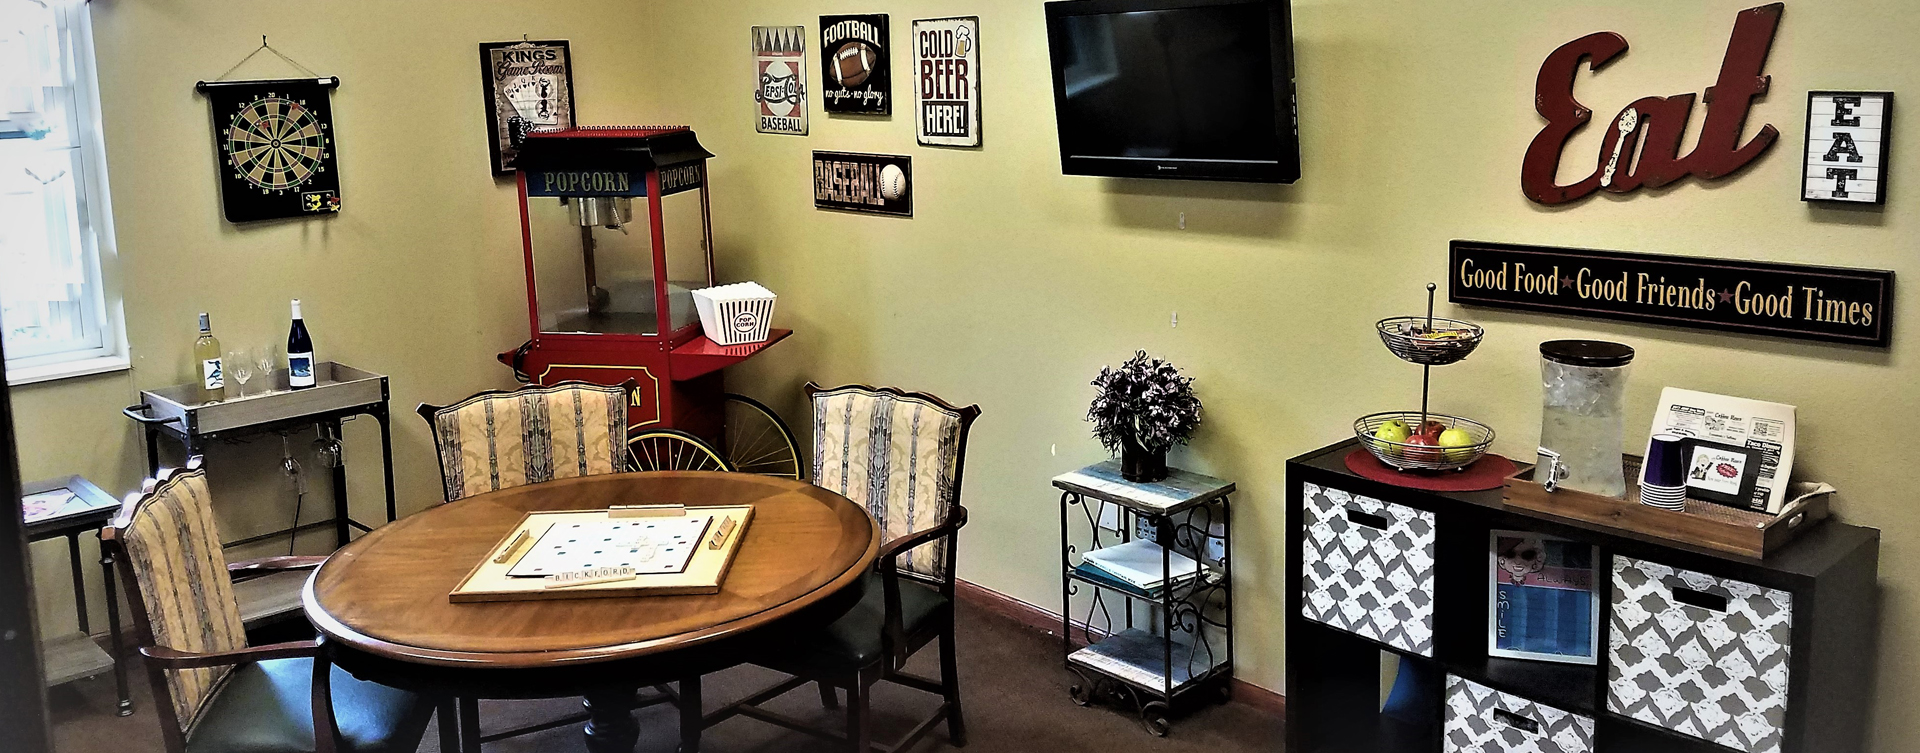 Unleash your creative side in the activity room at Bickford of Midland